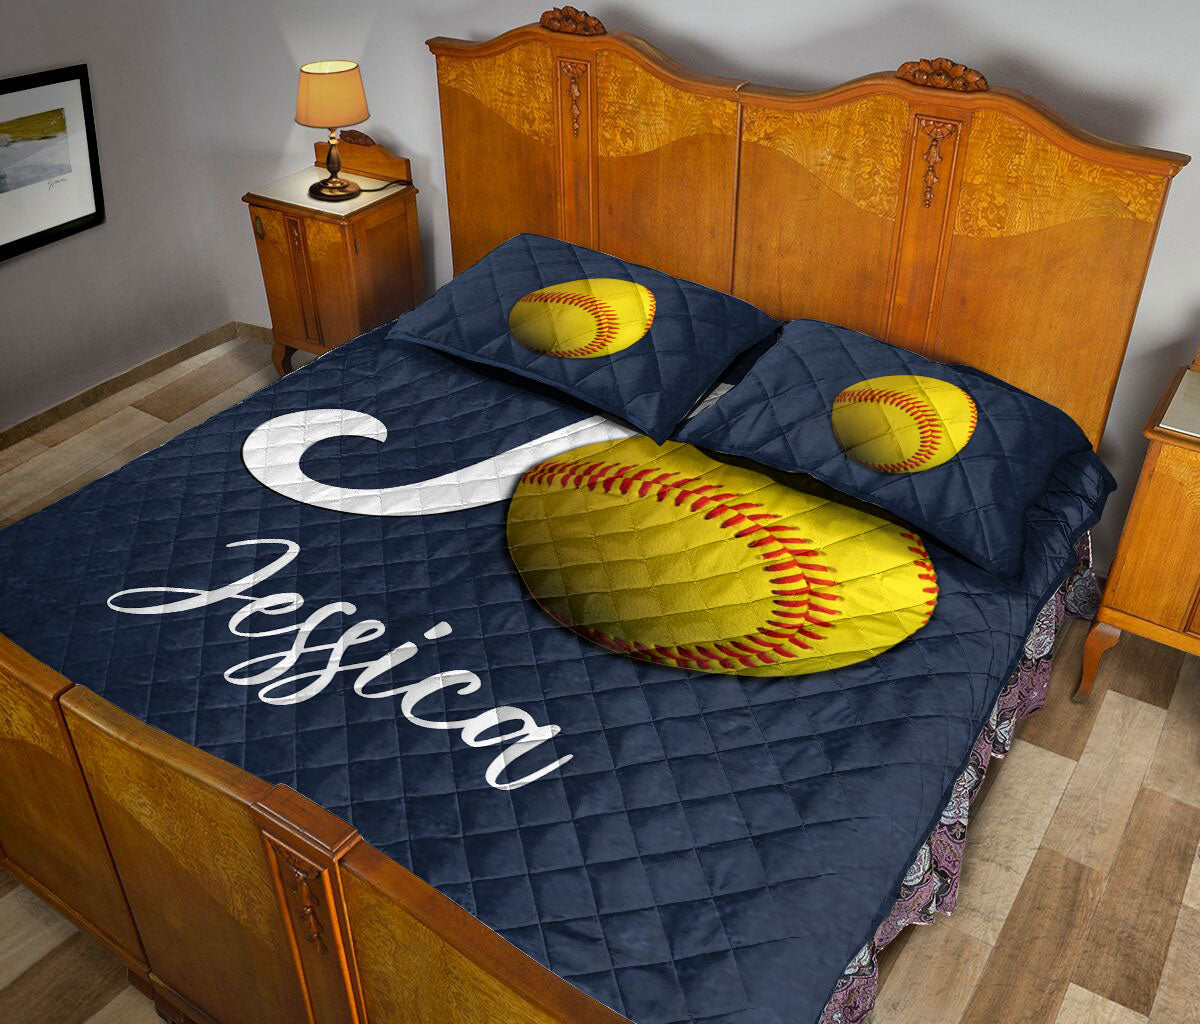 Ohaprints-Quilt-Bed-Set-Pillowcase-Softball-Ball-Navy-Background-Sports-Lover-Gift-Custom-Personalized-Name-Blanket-Bedspread-Bedding-575-King (90'' x 100'')